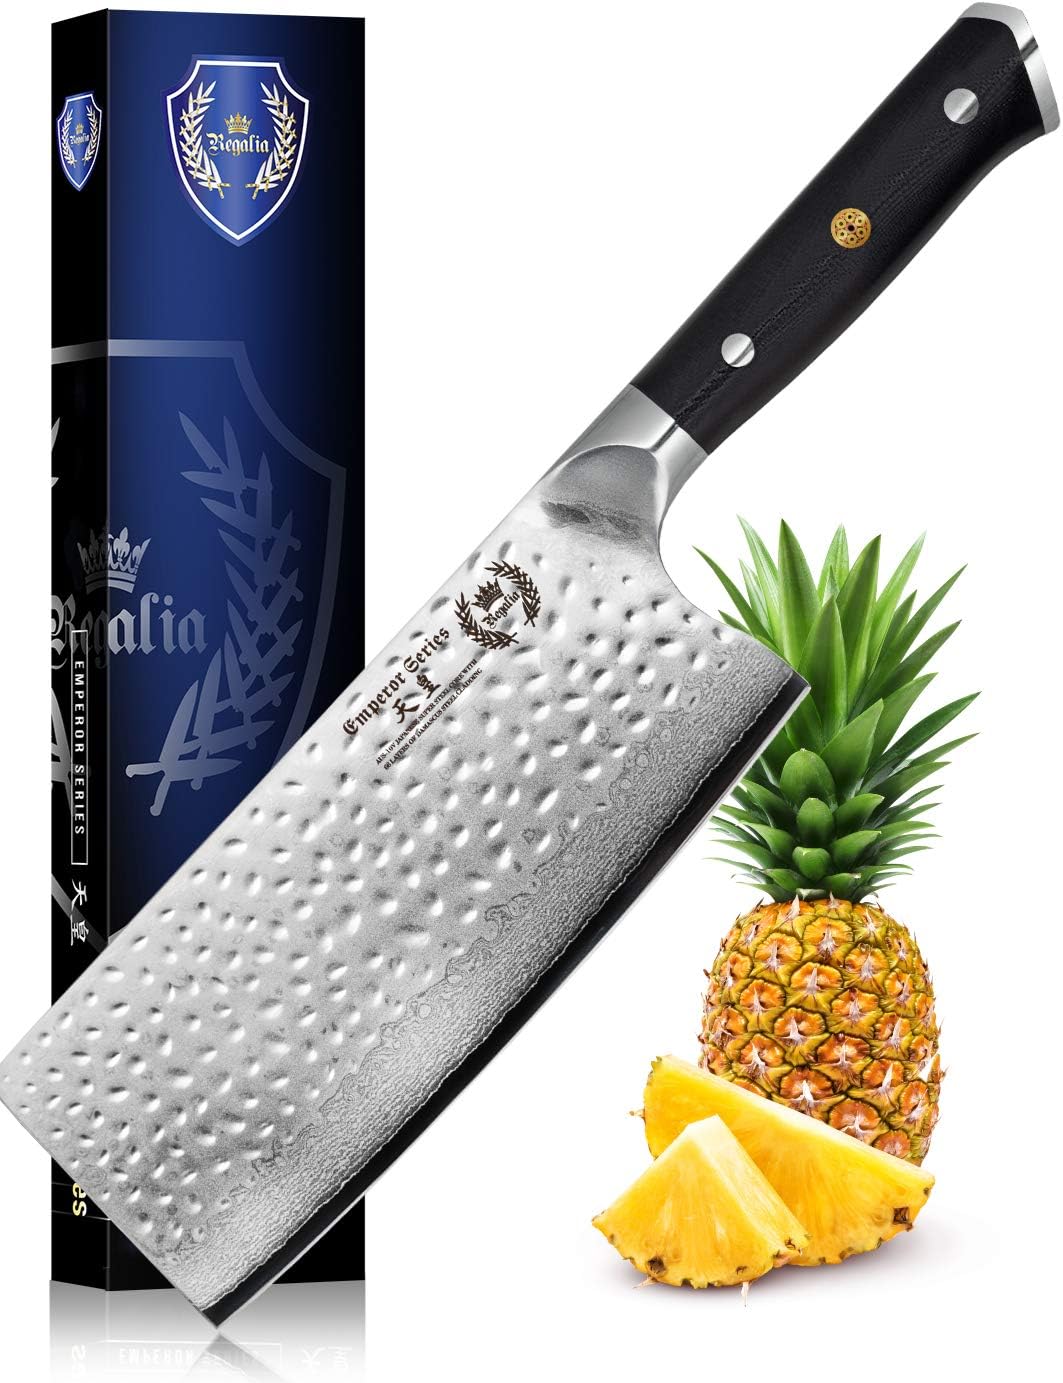 Regalia Chinese Meat Cleaver Butcher Knife 7 inch: Heavy Duty Professional Japanese AUS-10 67-Layer Damascus Steel Ultra Sharp Blade Vegetable Chopper w/G-10 Ergonomic handle Knives